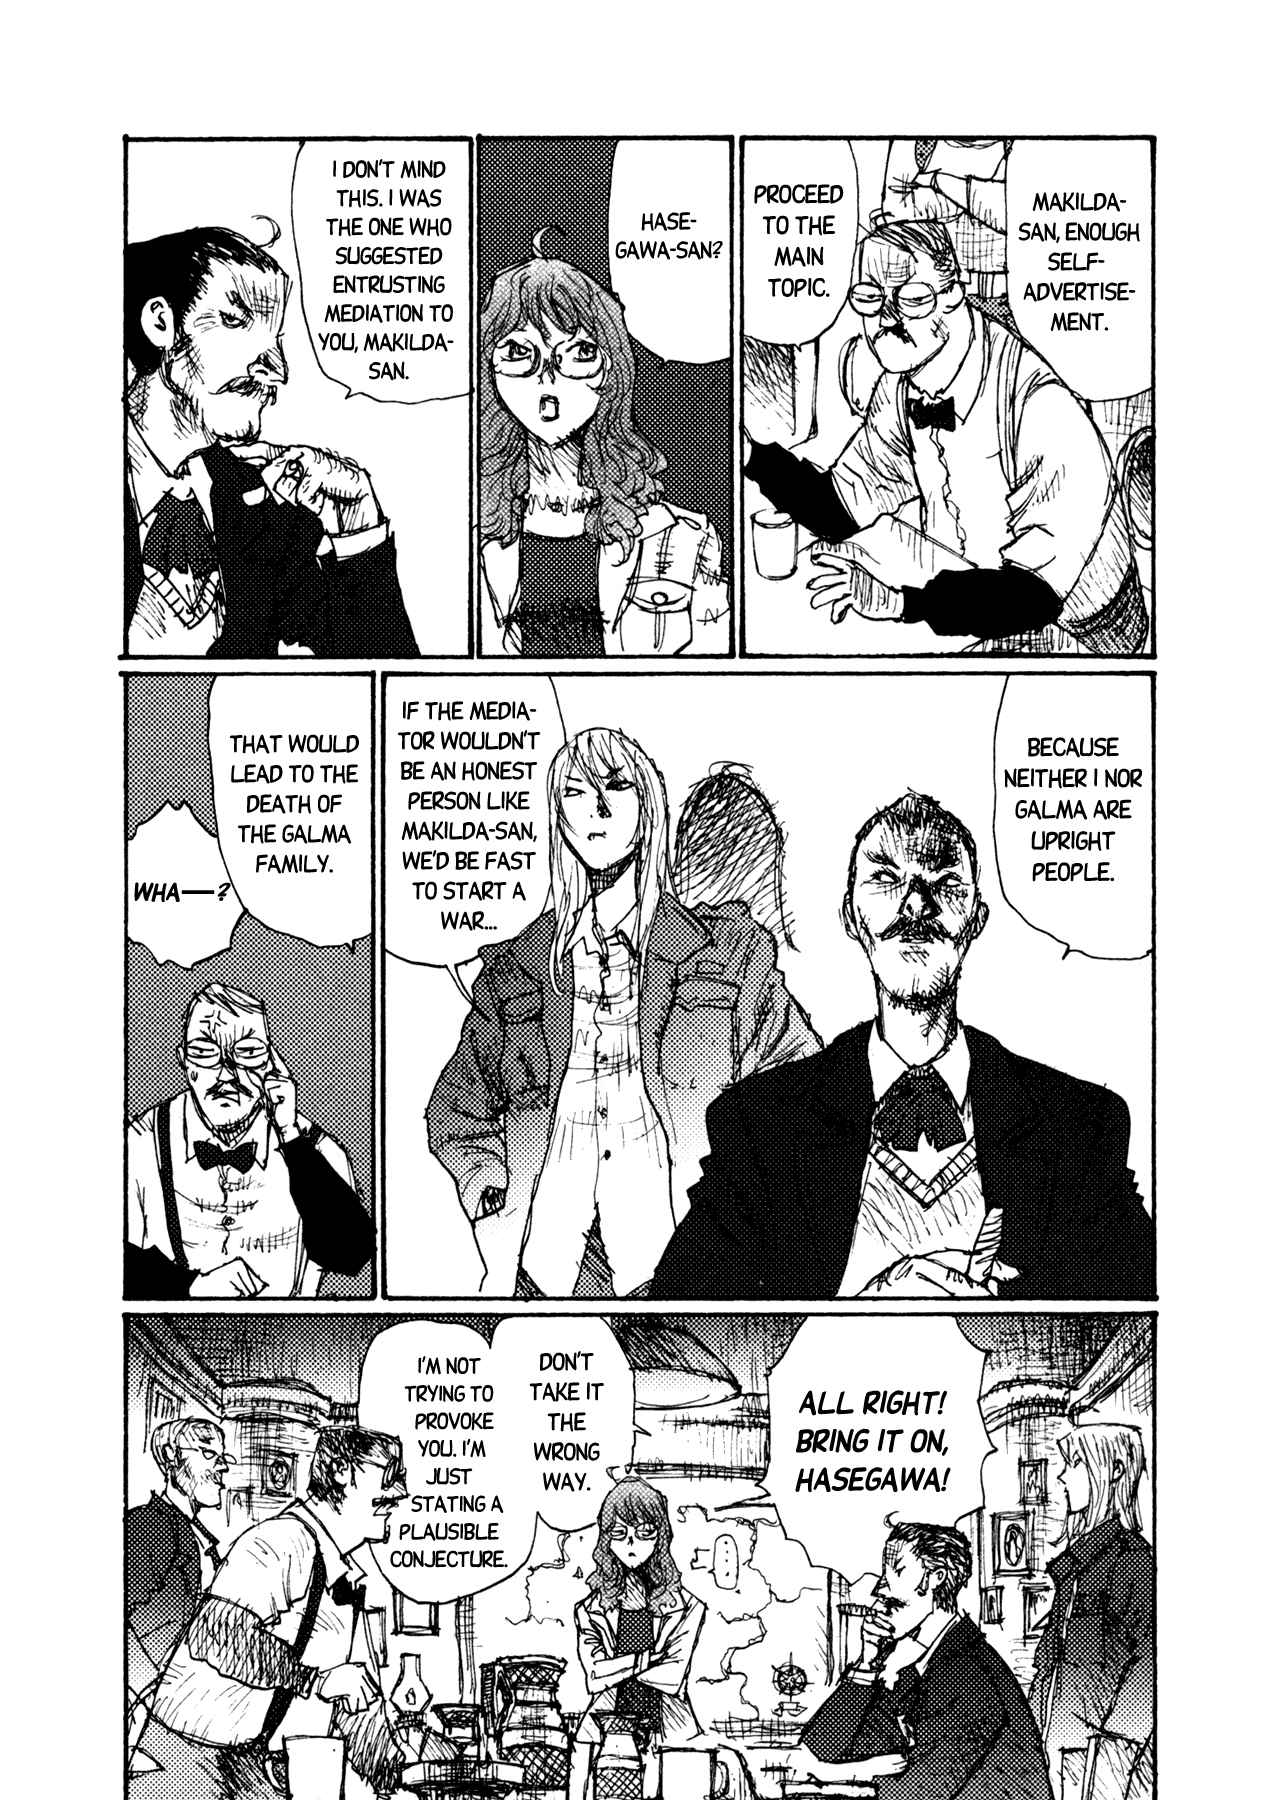 Alice from Hell Vol. 2 Ch. 8 It's Rotten